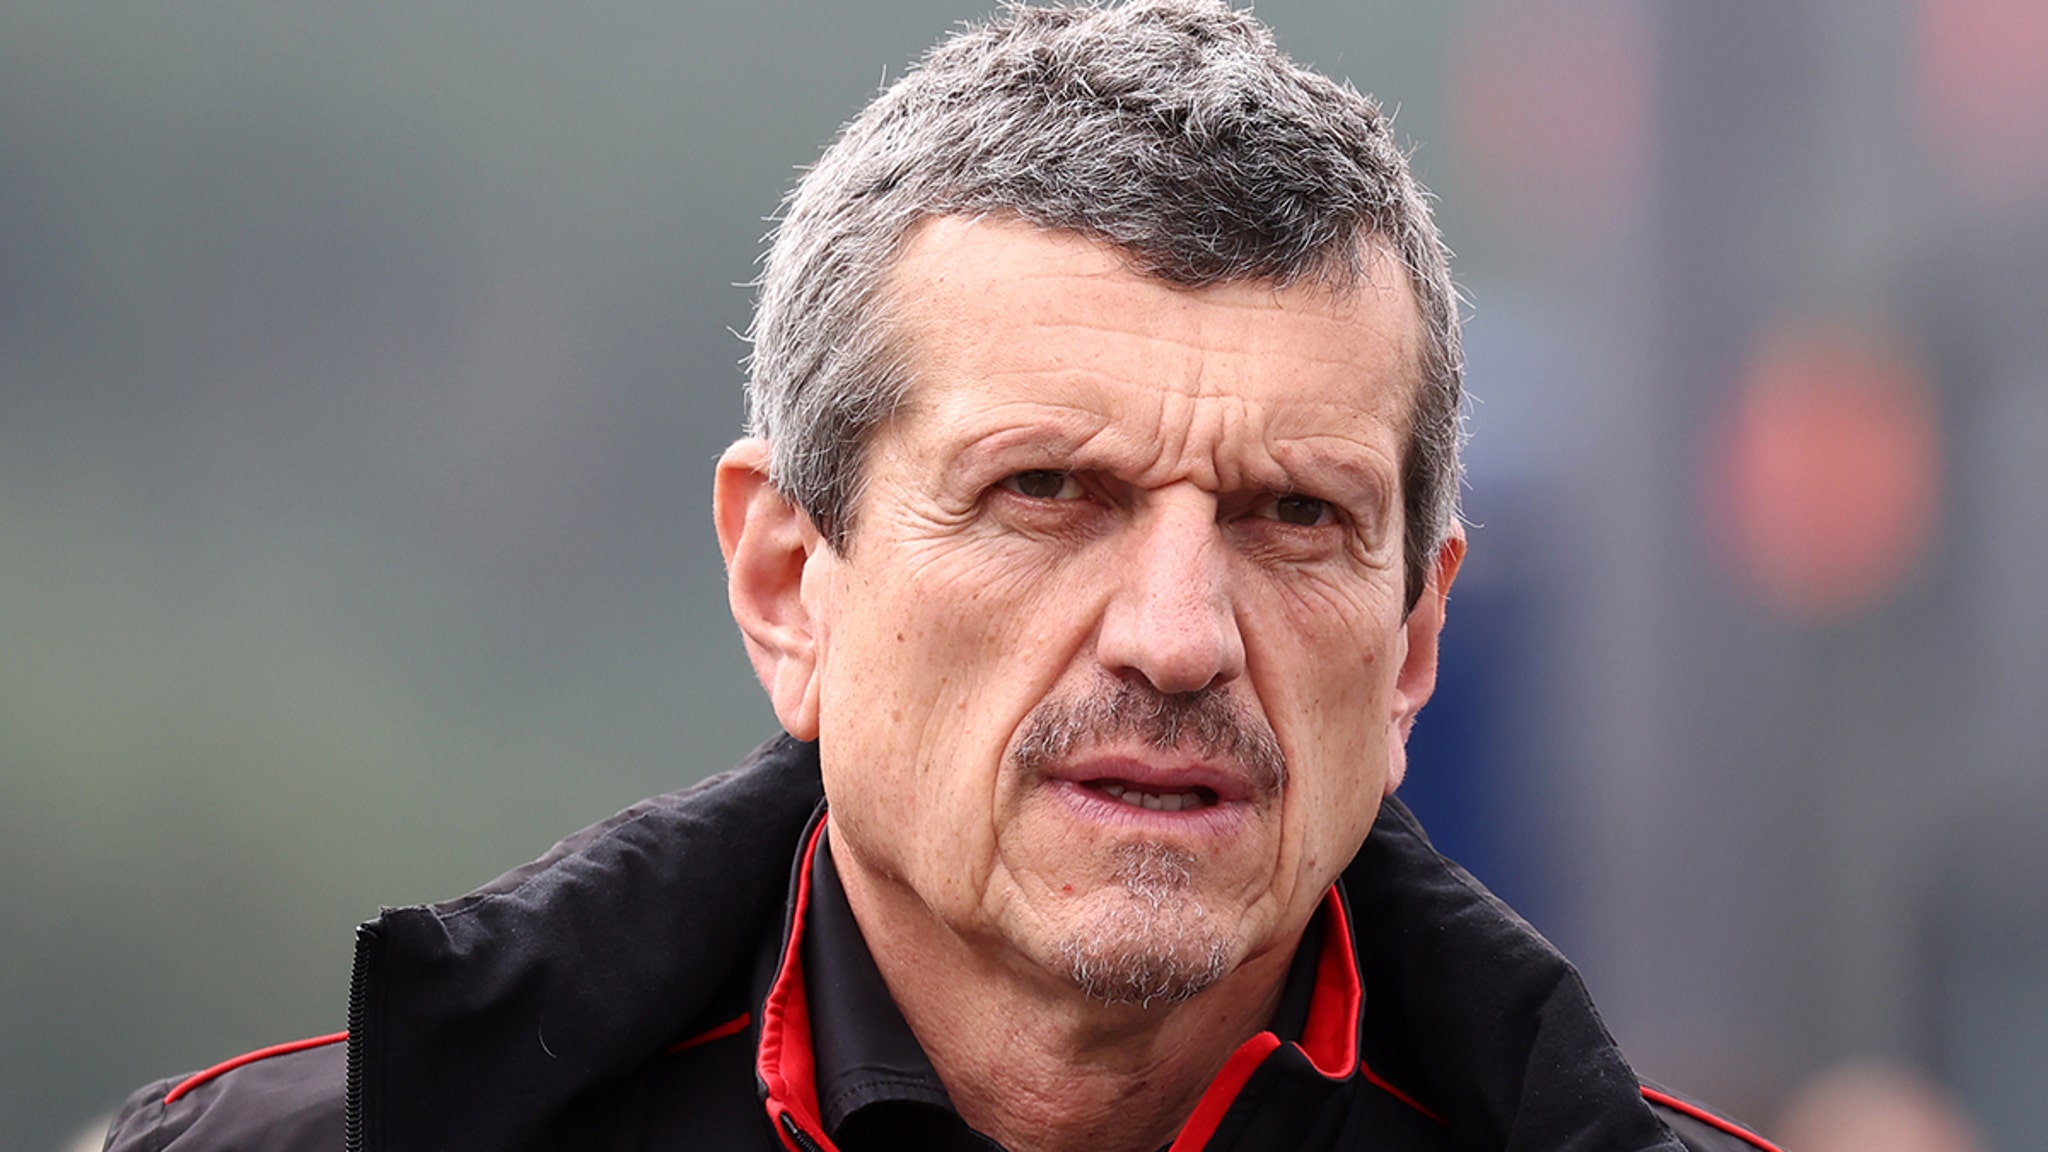 Haas Team Principal Guenther Steiner Leaves Role, Ayao Komatsu Takes Over